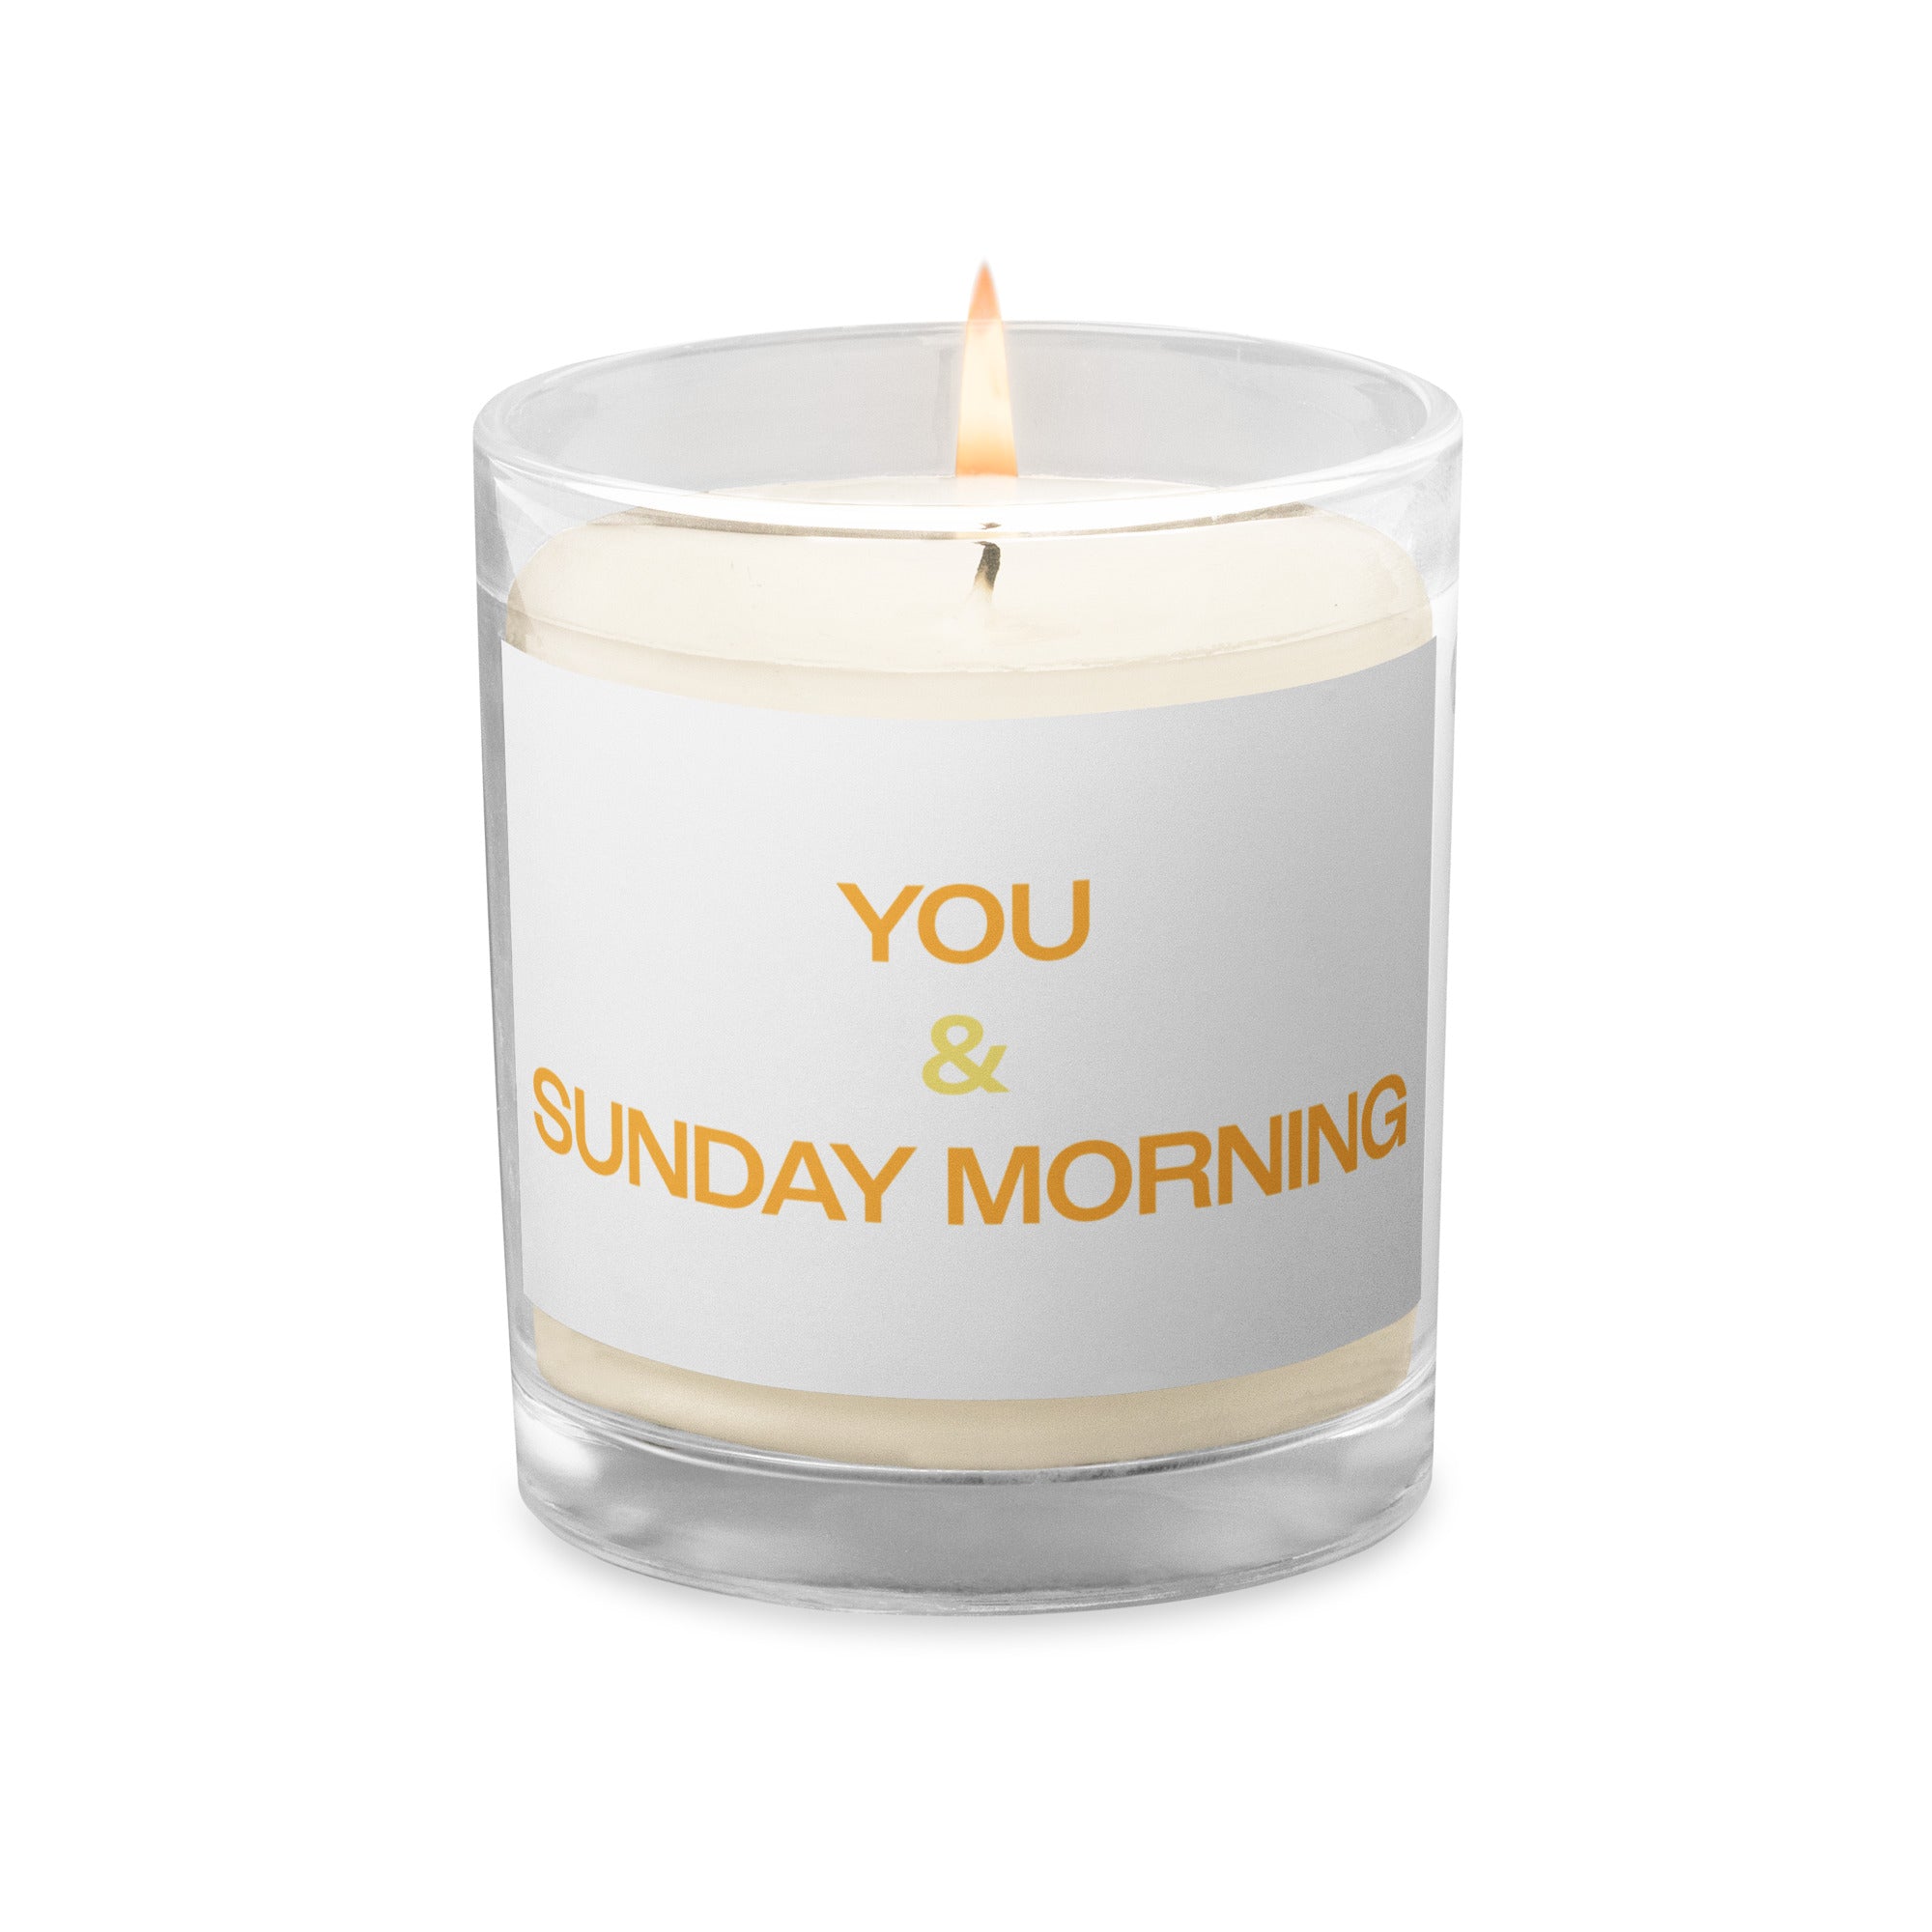 Kirk Whalum - You & Sunday Morning – Glass jar soy wax candle